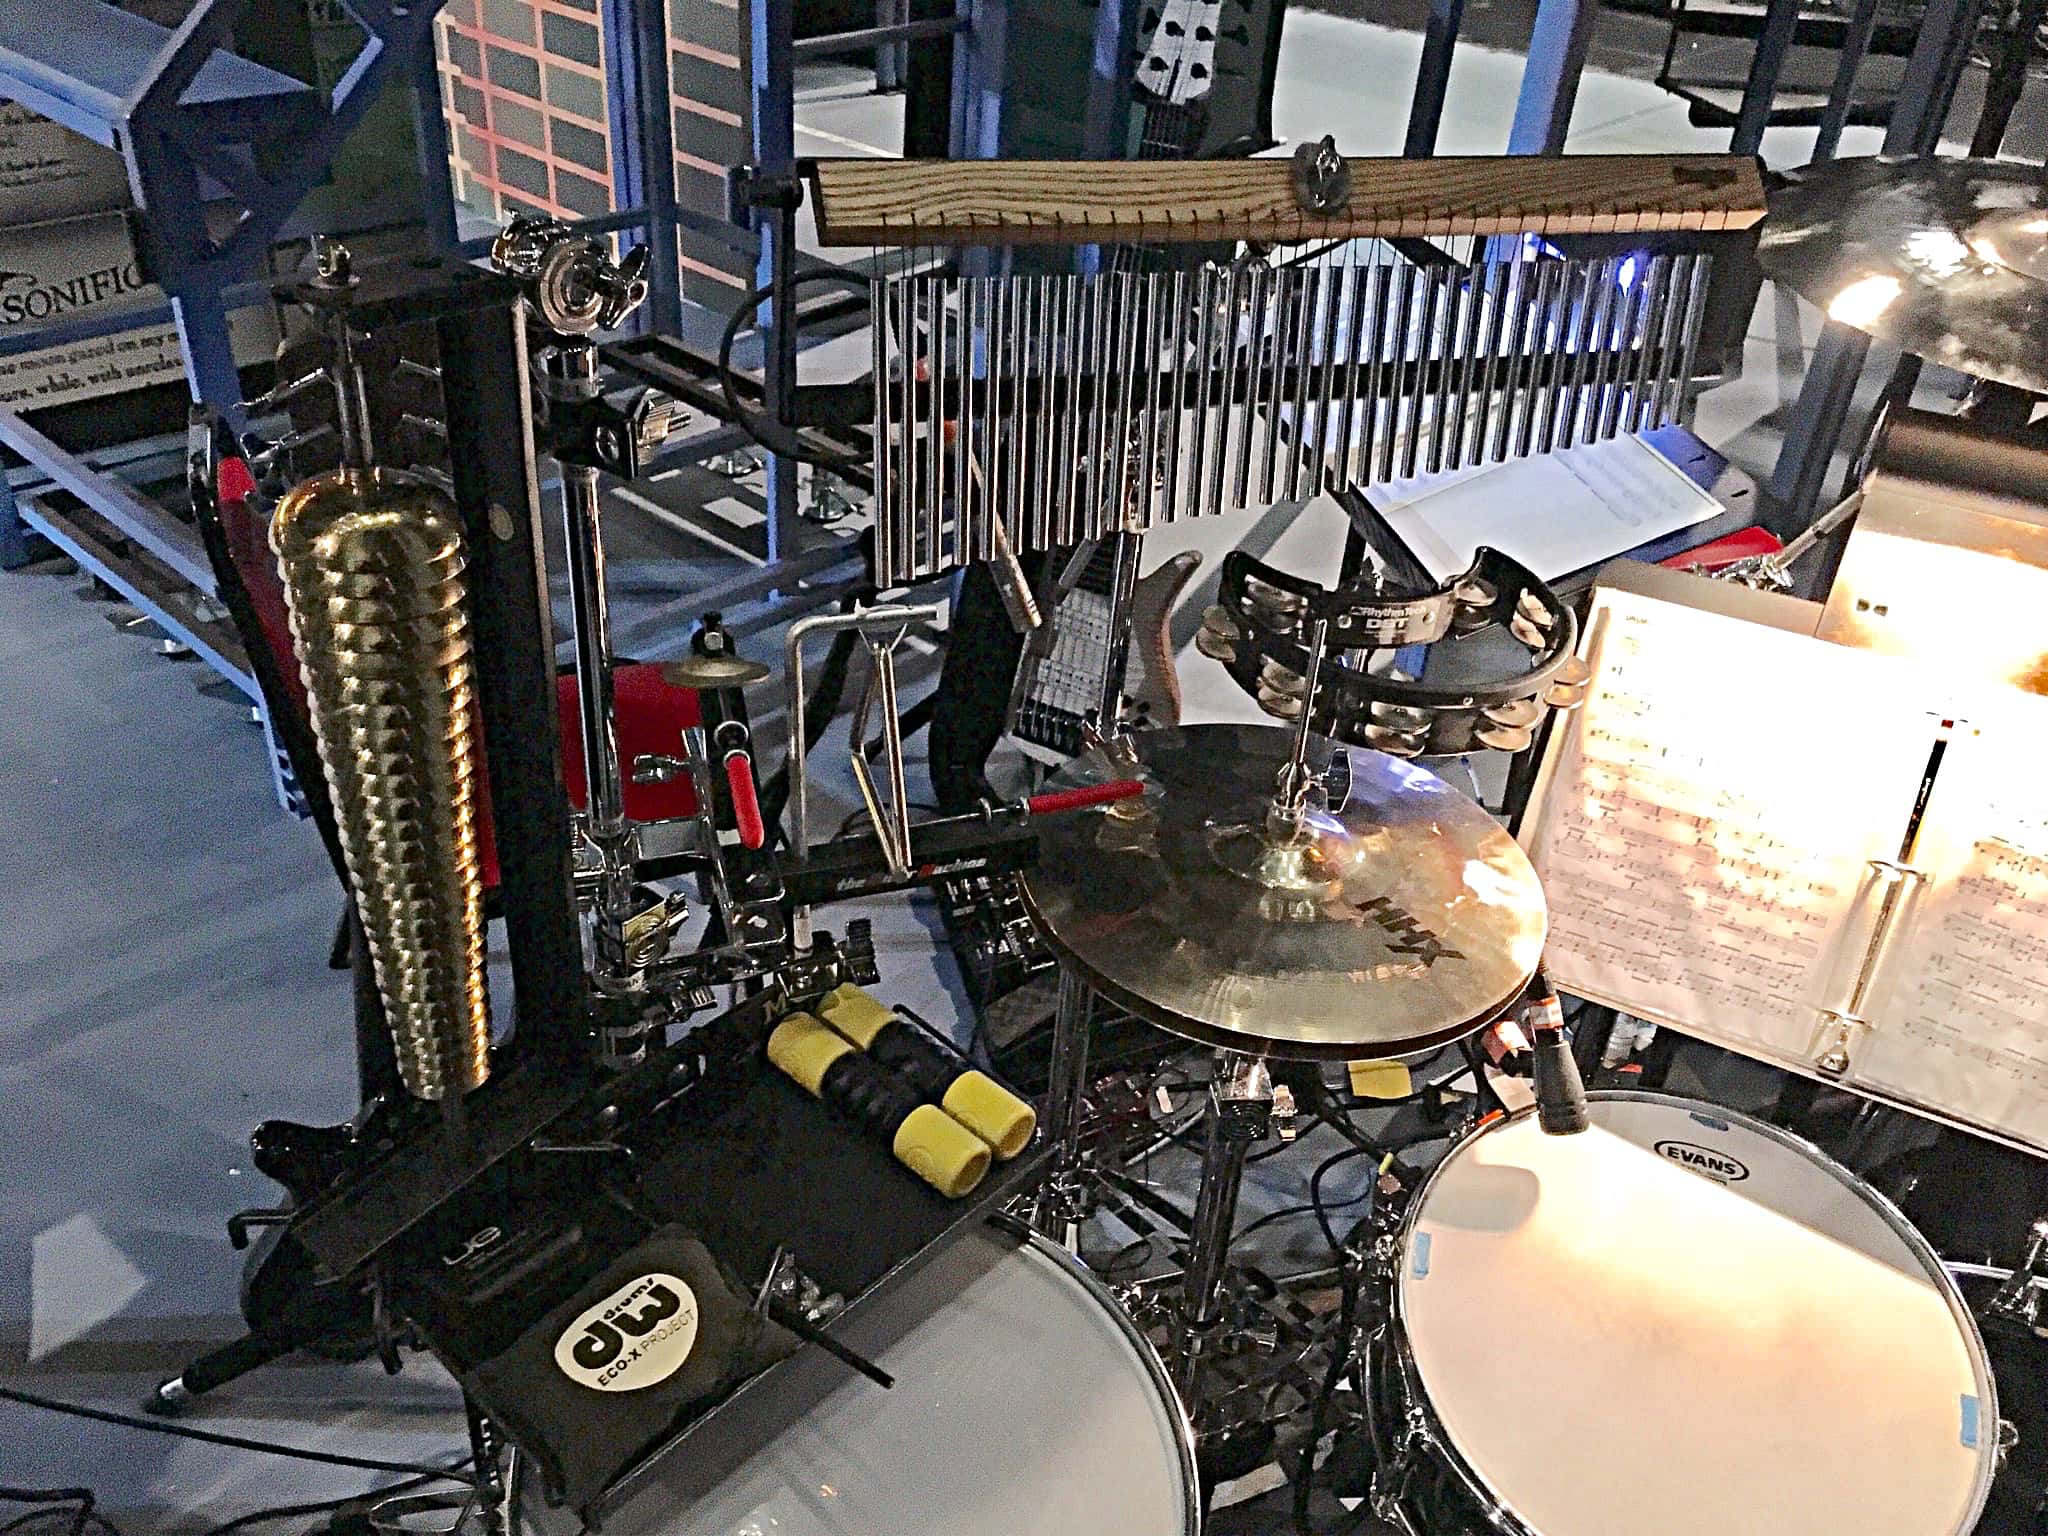 Brett Beirsdorfer's drum set setup for the National Tour of Fame at the Eisenhower Hall Theatre in West Point, New York.